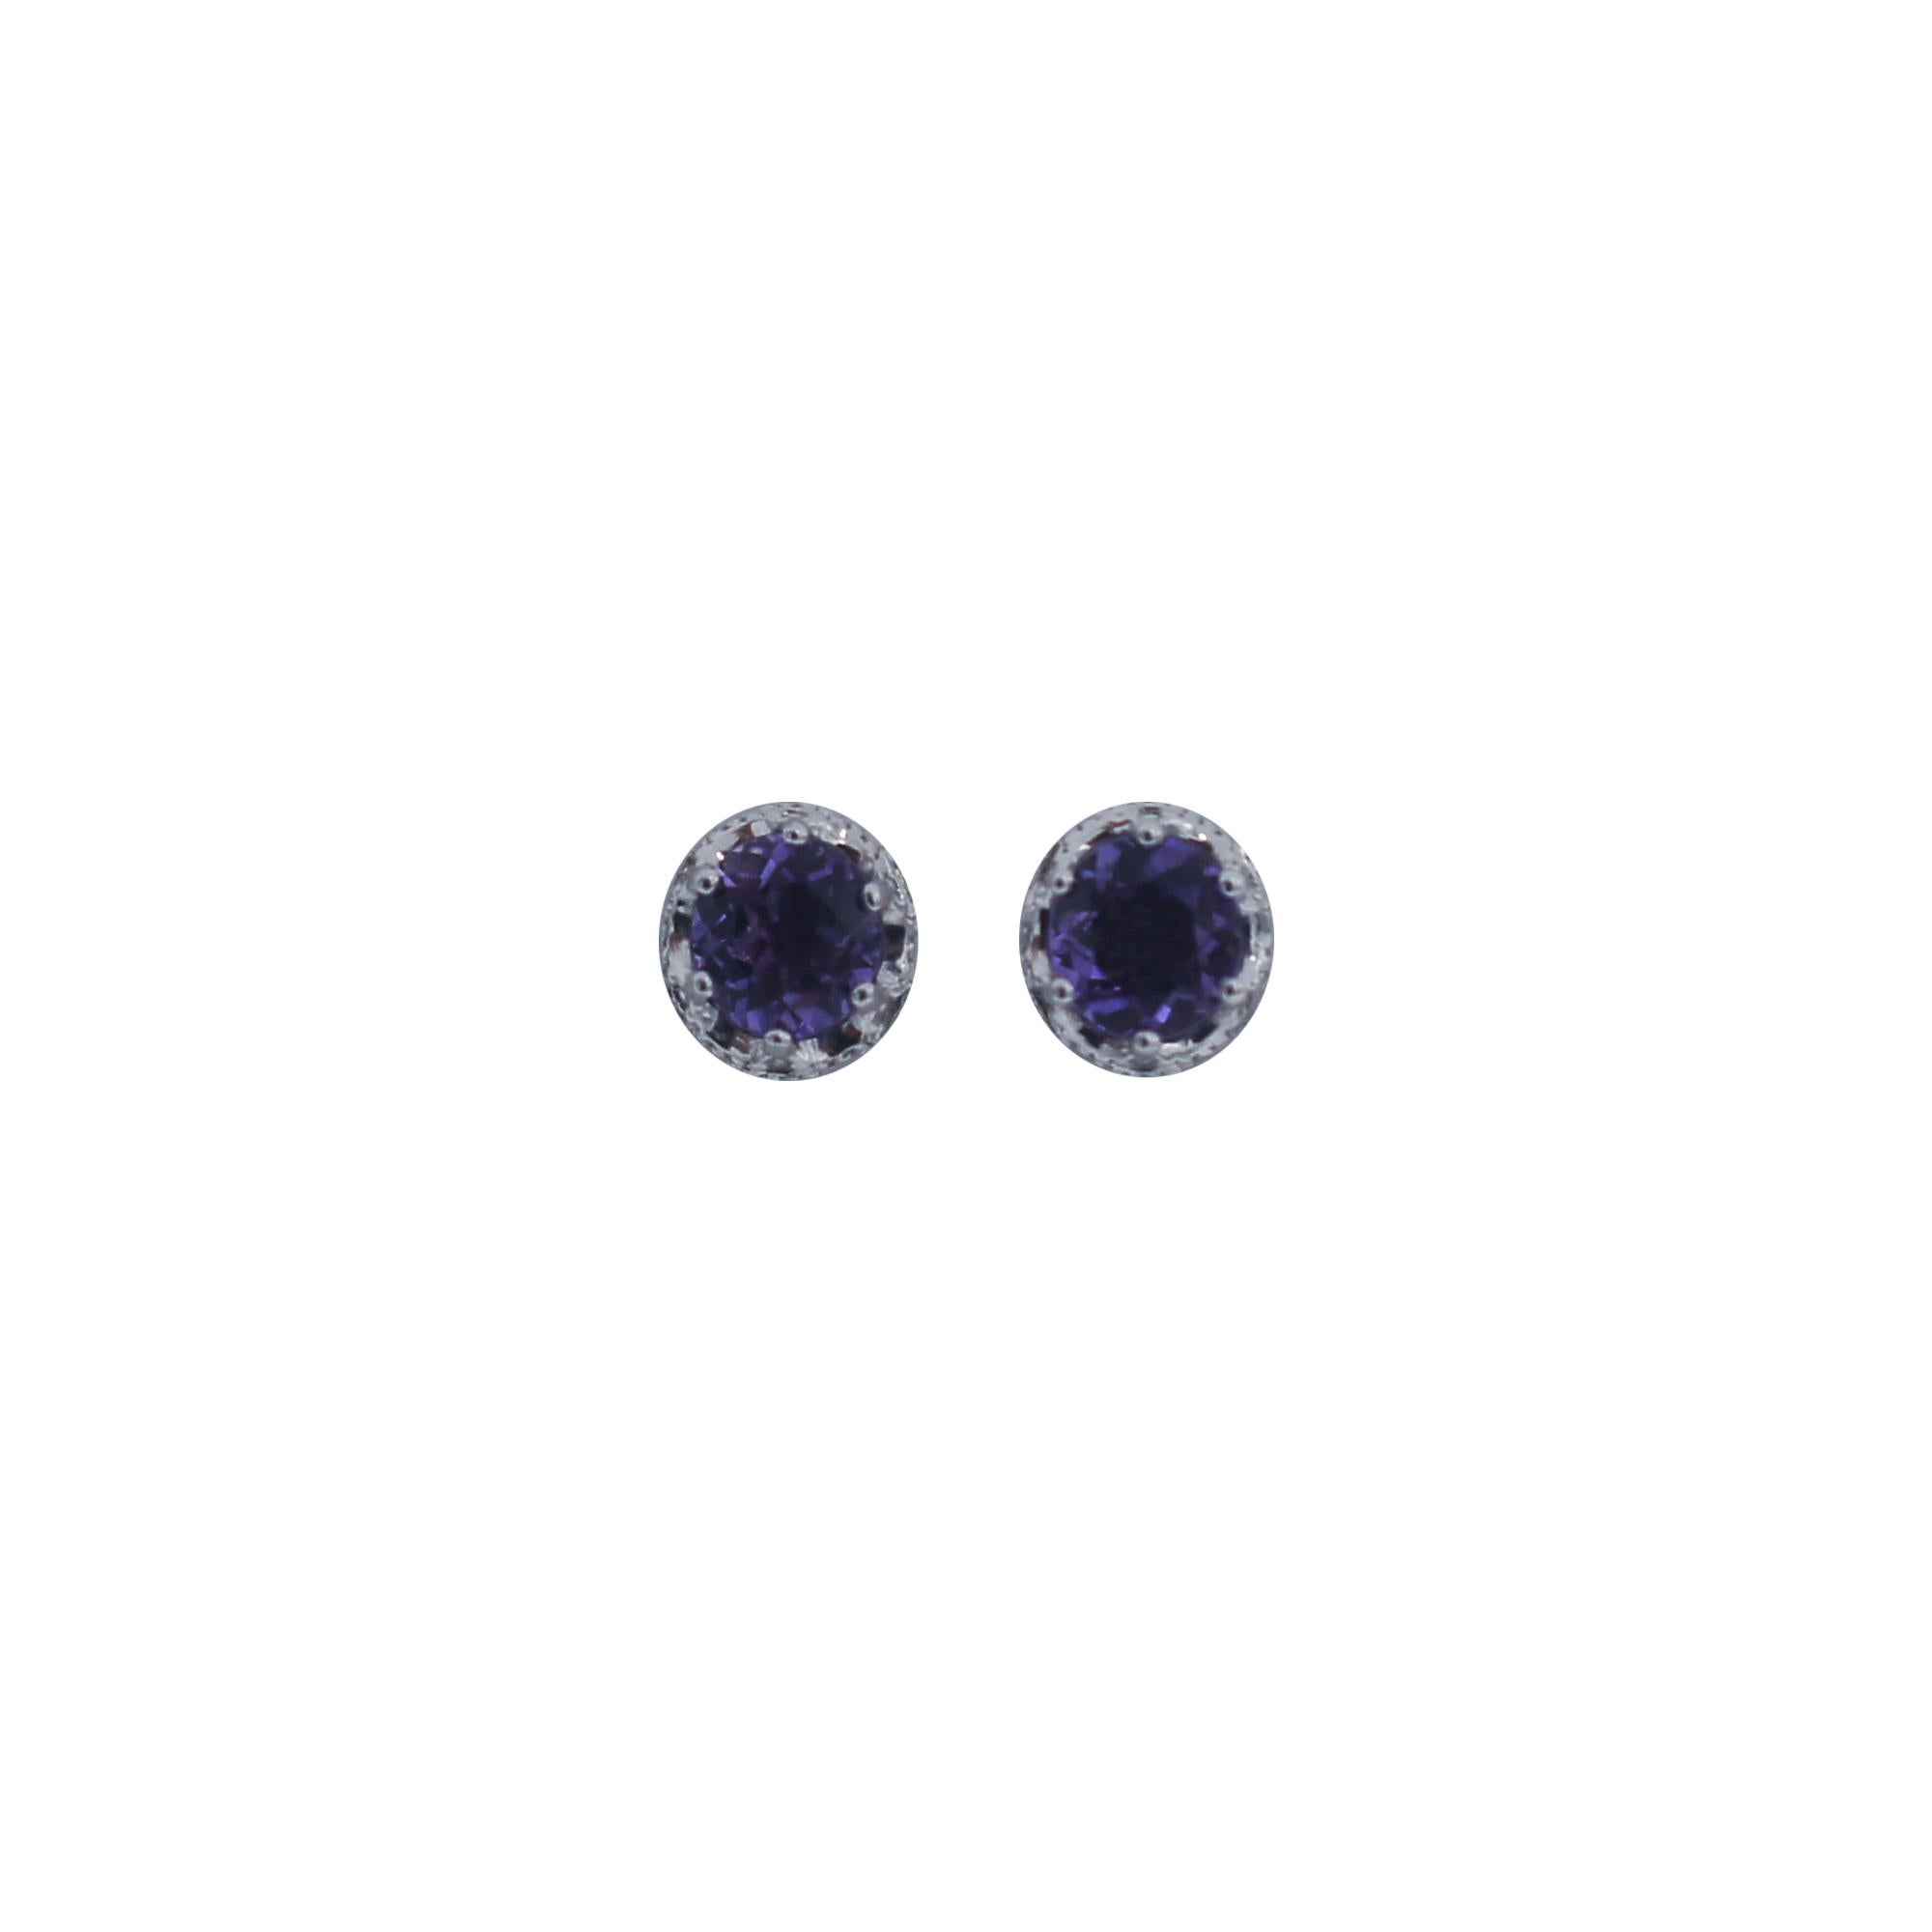 TACORI
Crescent Crown
Petite Stud Earrings
Style SE24001
Amethyst Gem Stone
Approx. .92 carat weight
measures: .25